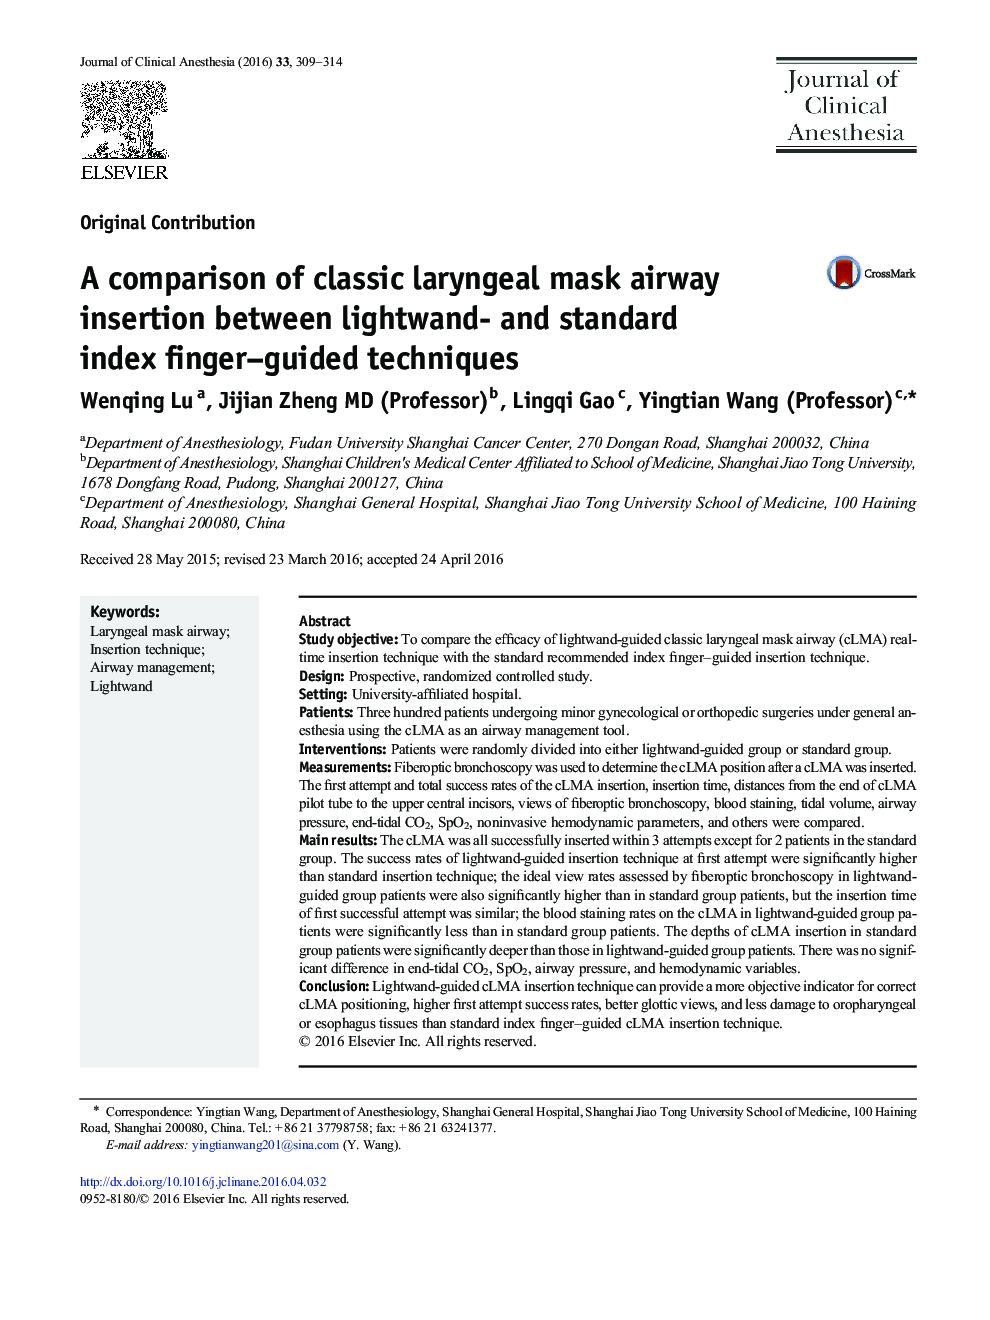 A comparison of classic laryngeal mask airway insertion between lightwand- and standard index finger–guided techniques